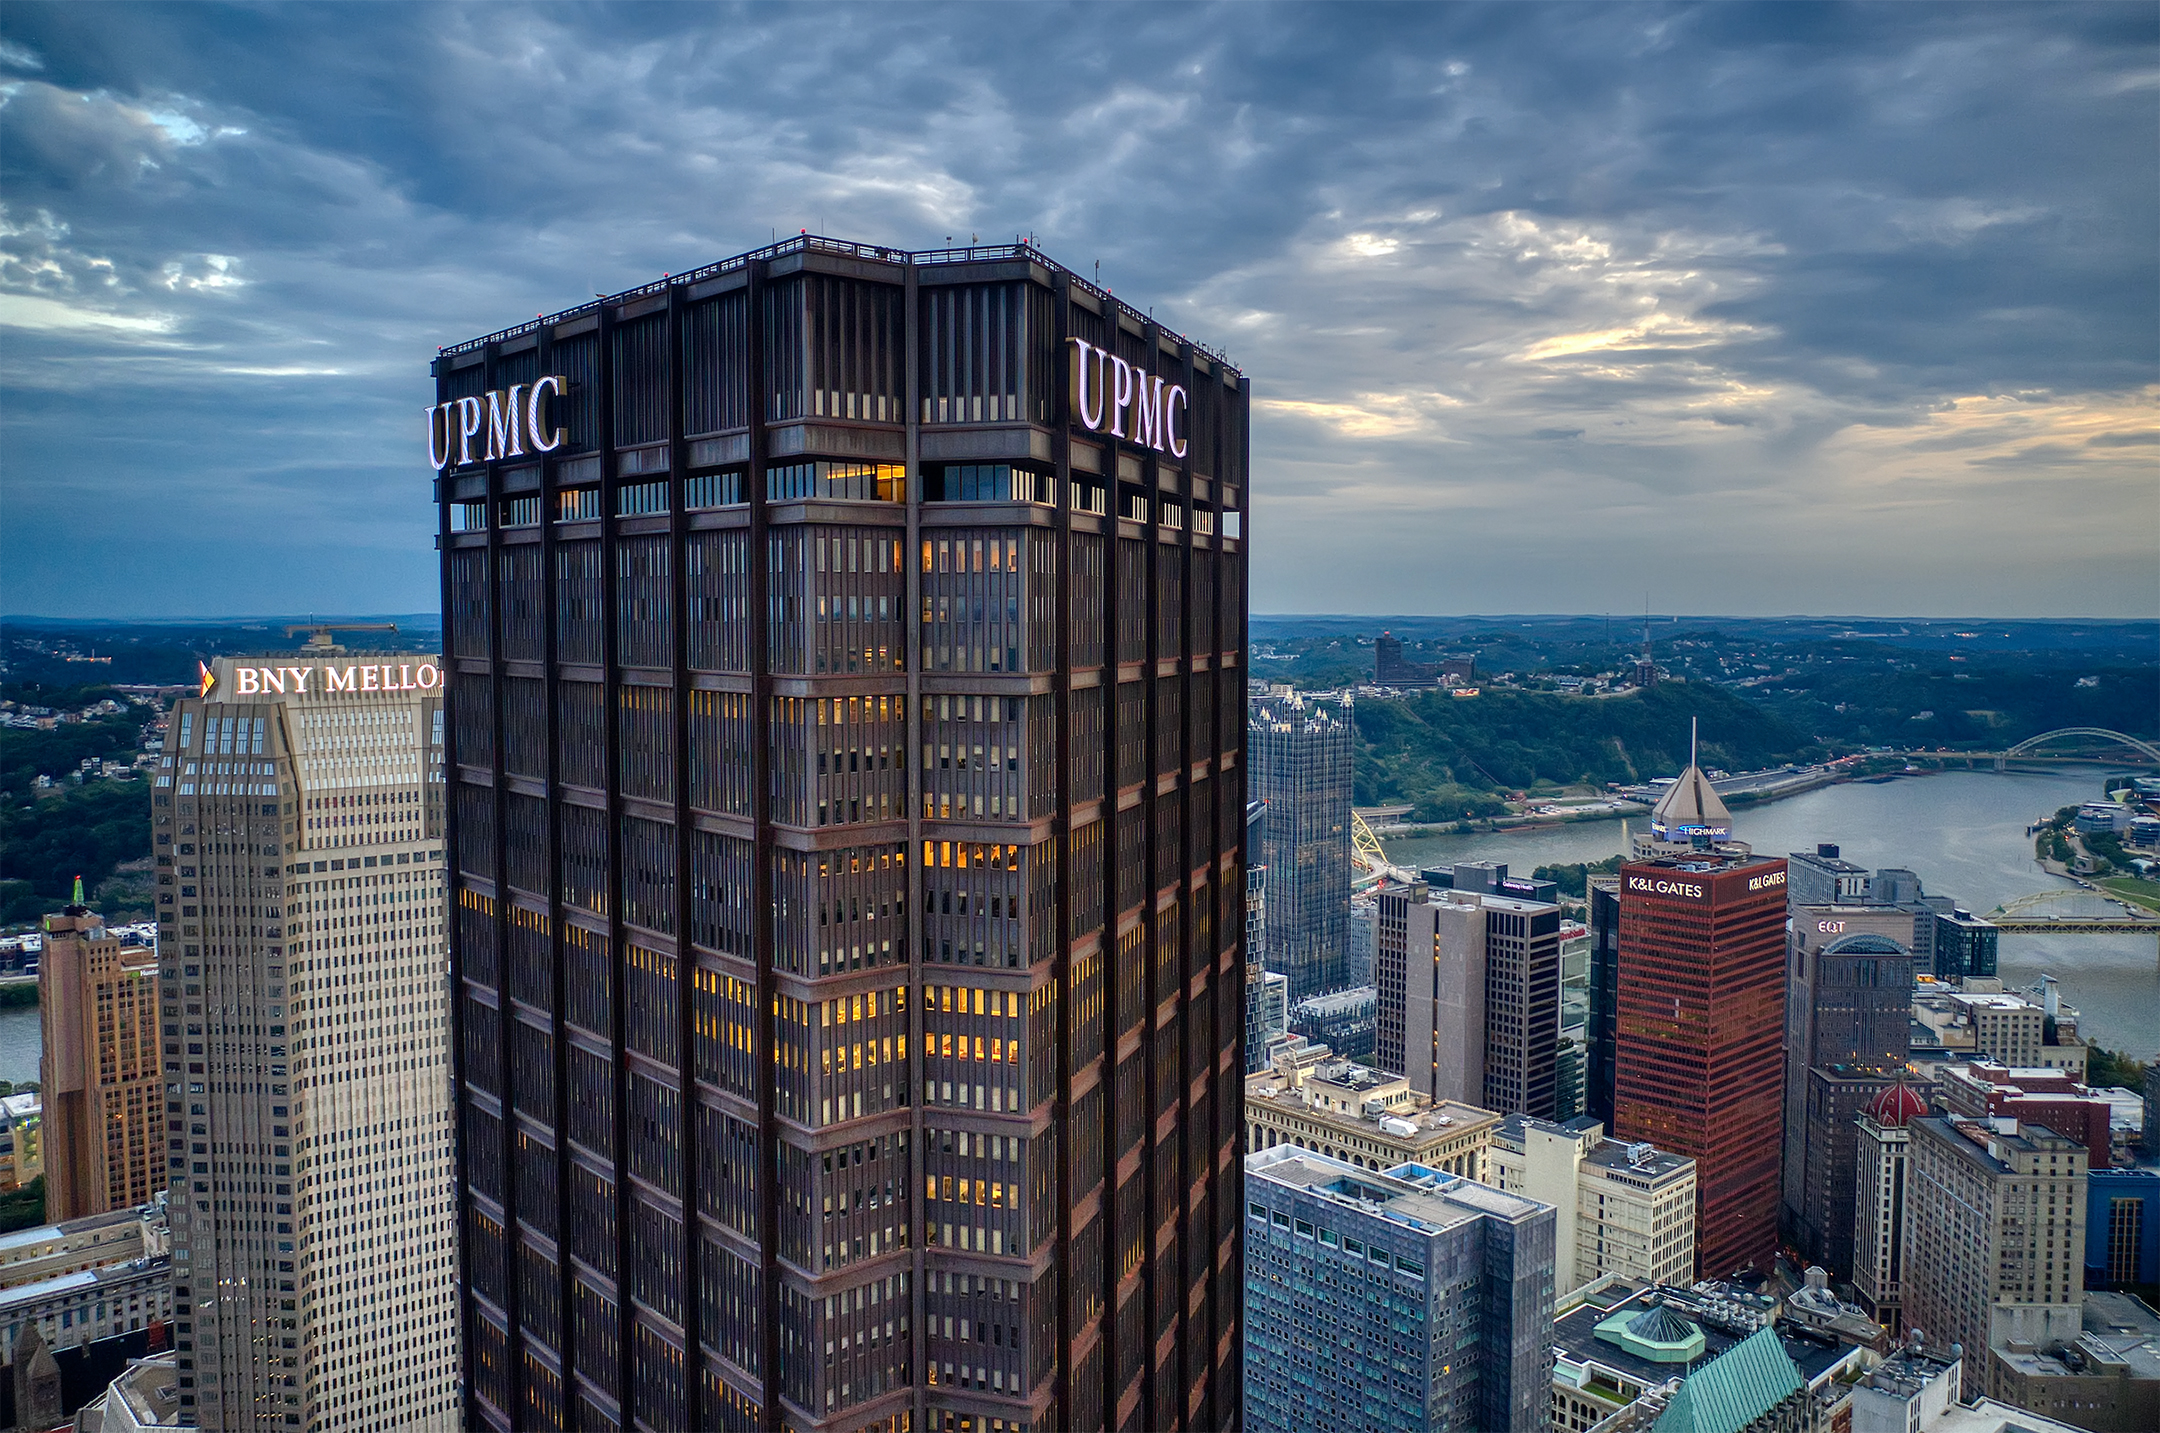 View of the US Steel Building in Pittsburgh with white UPMC letters hung on the top of the black skyscraper, seen from the air with the building looming over others